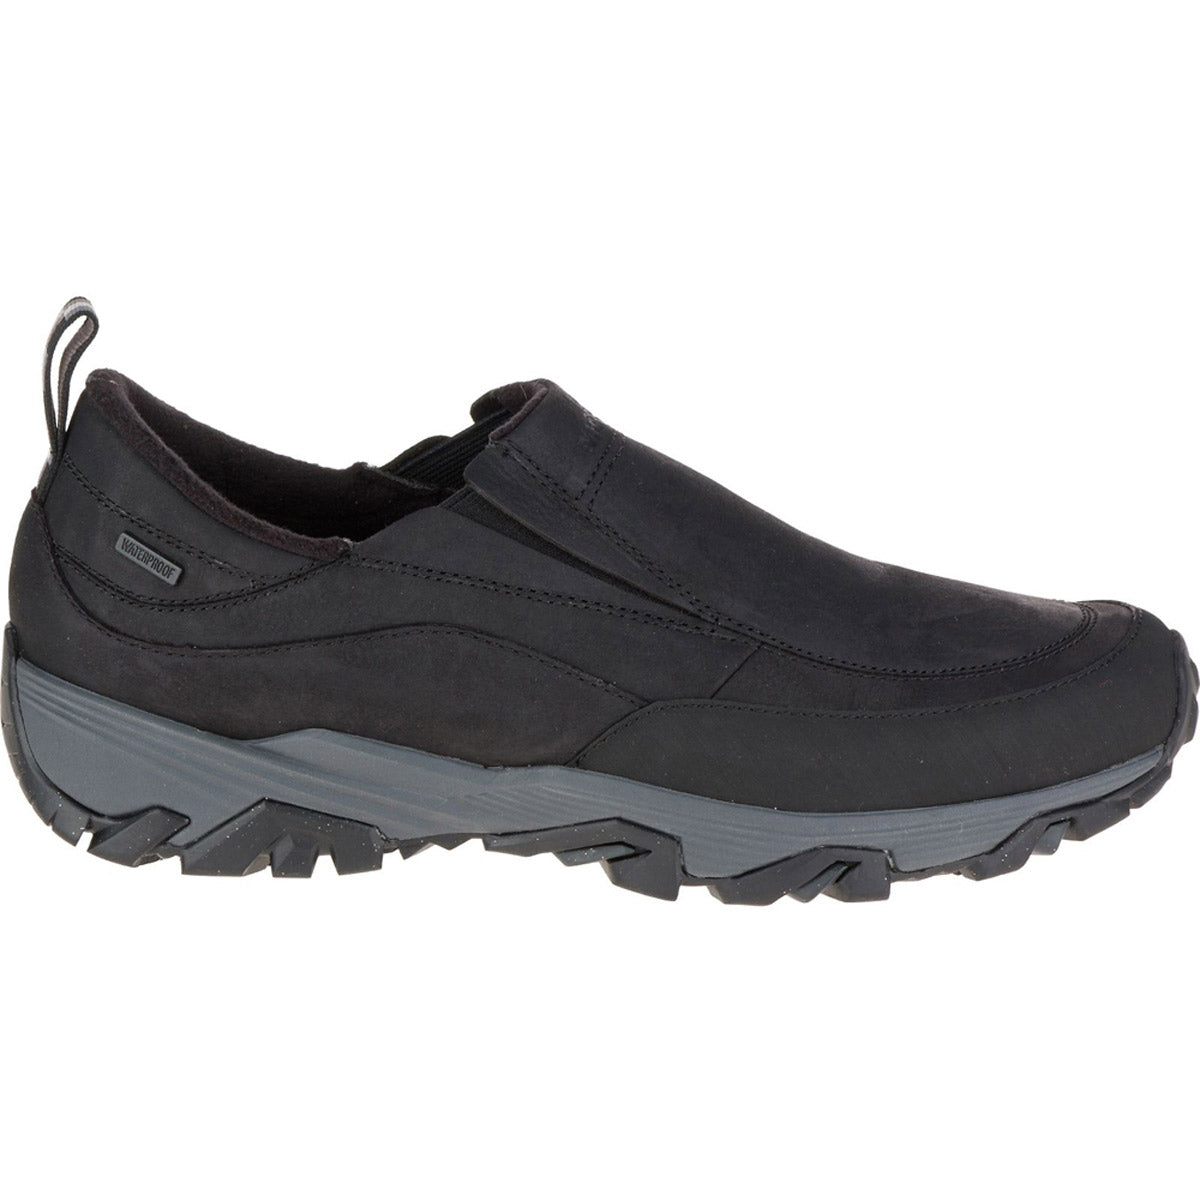 Merrell black waterproof slip-on casual shoe with a thick sole.